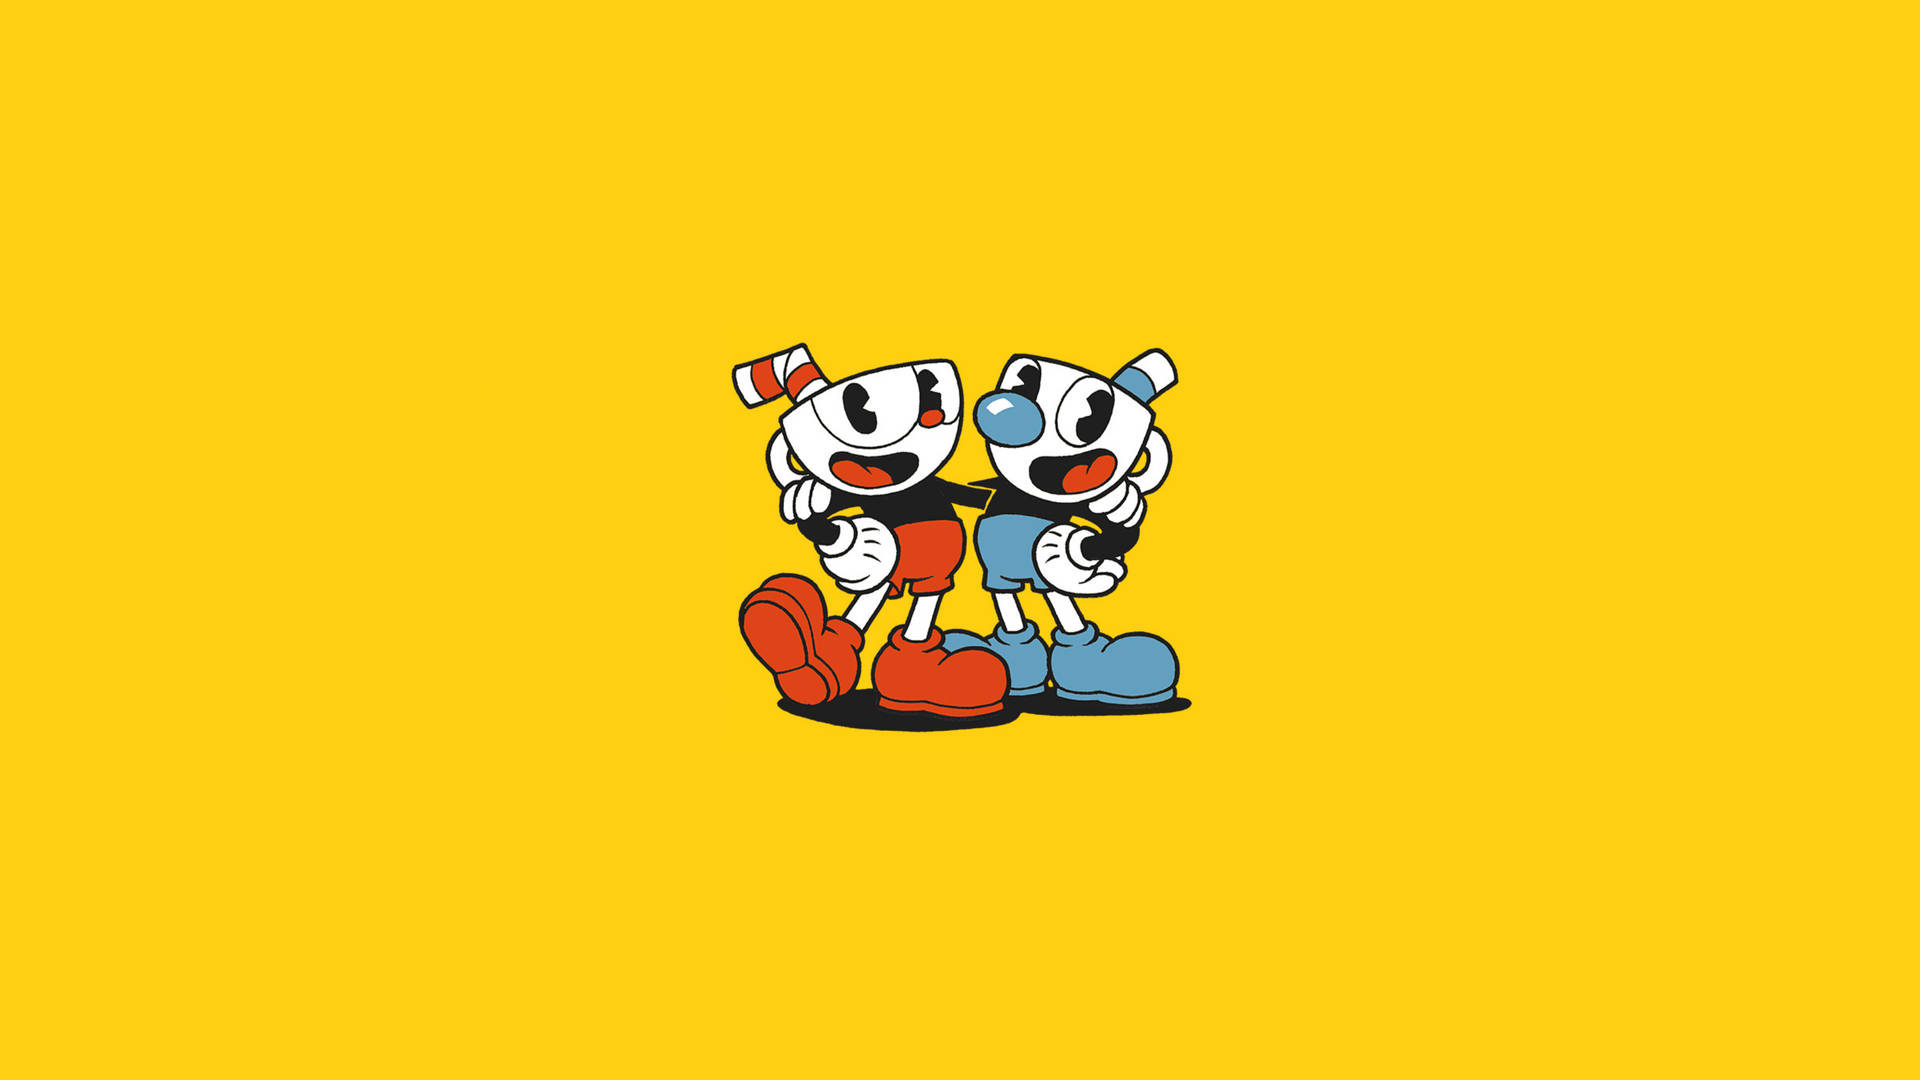 Cuphead 3840X2160 Wallpaper and Background Image